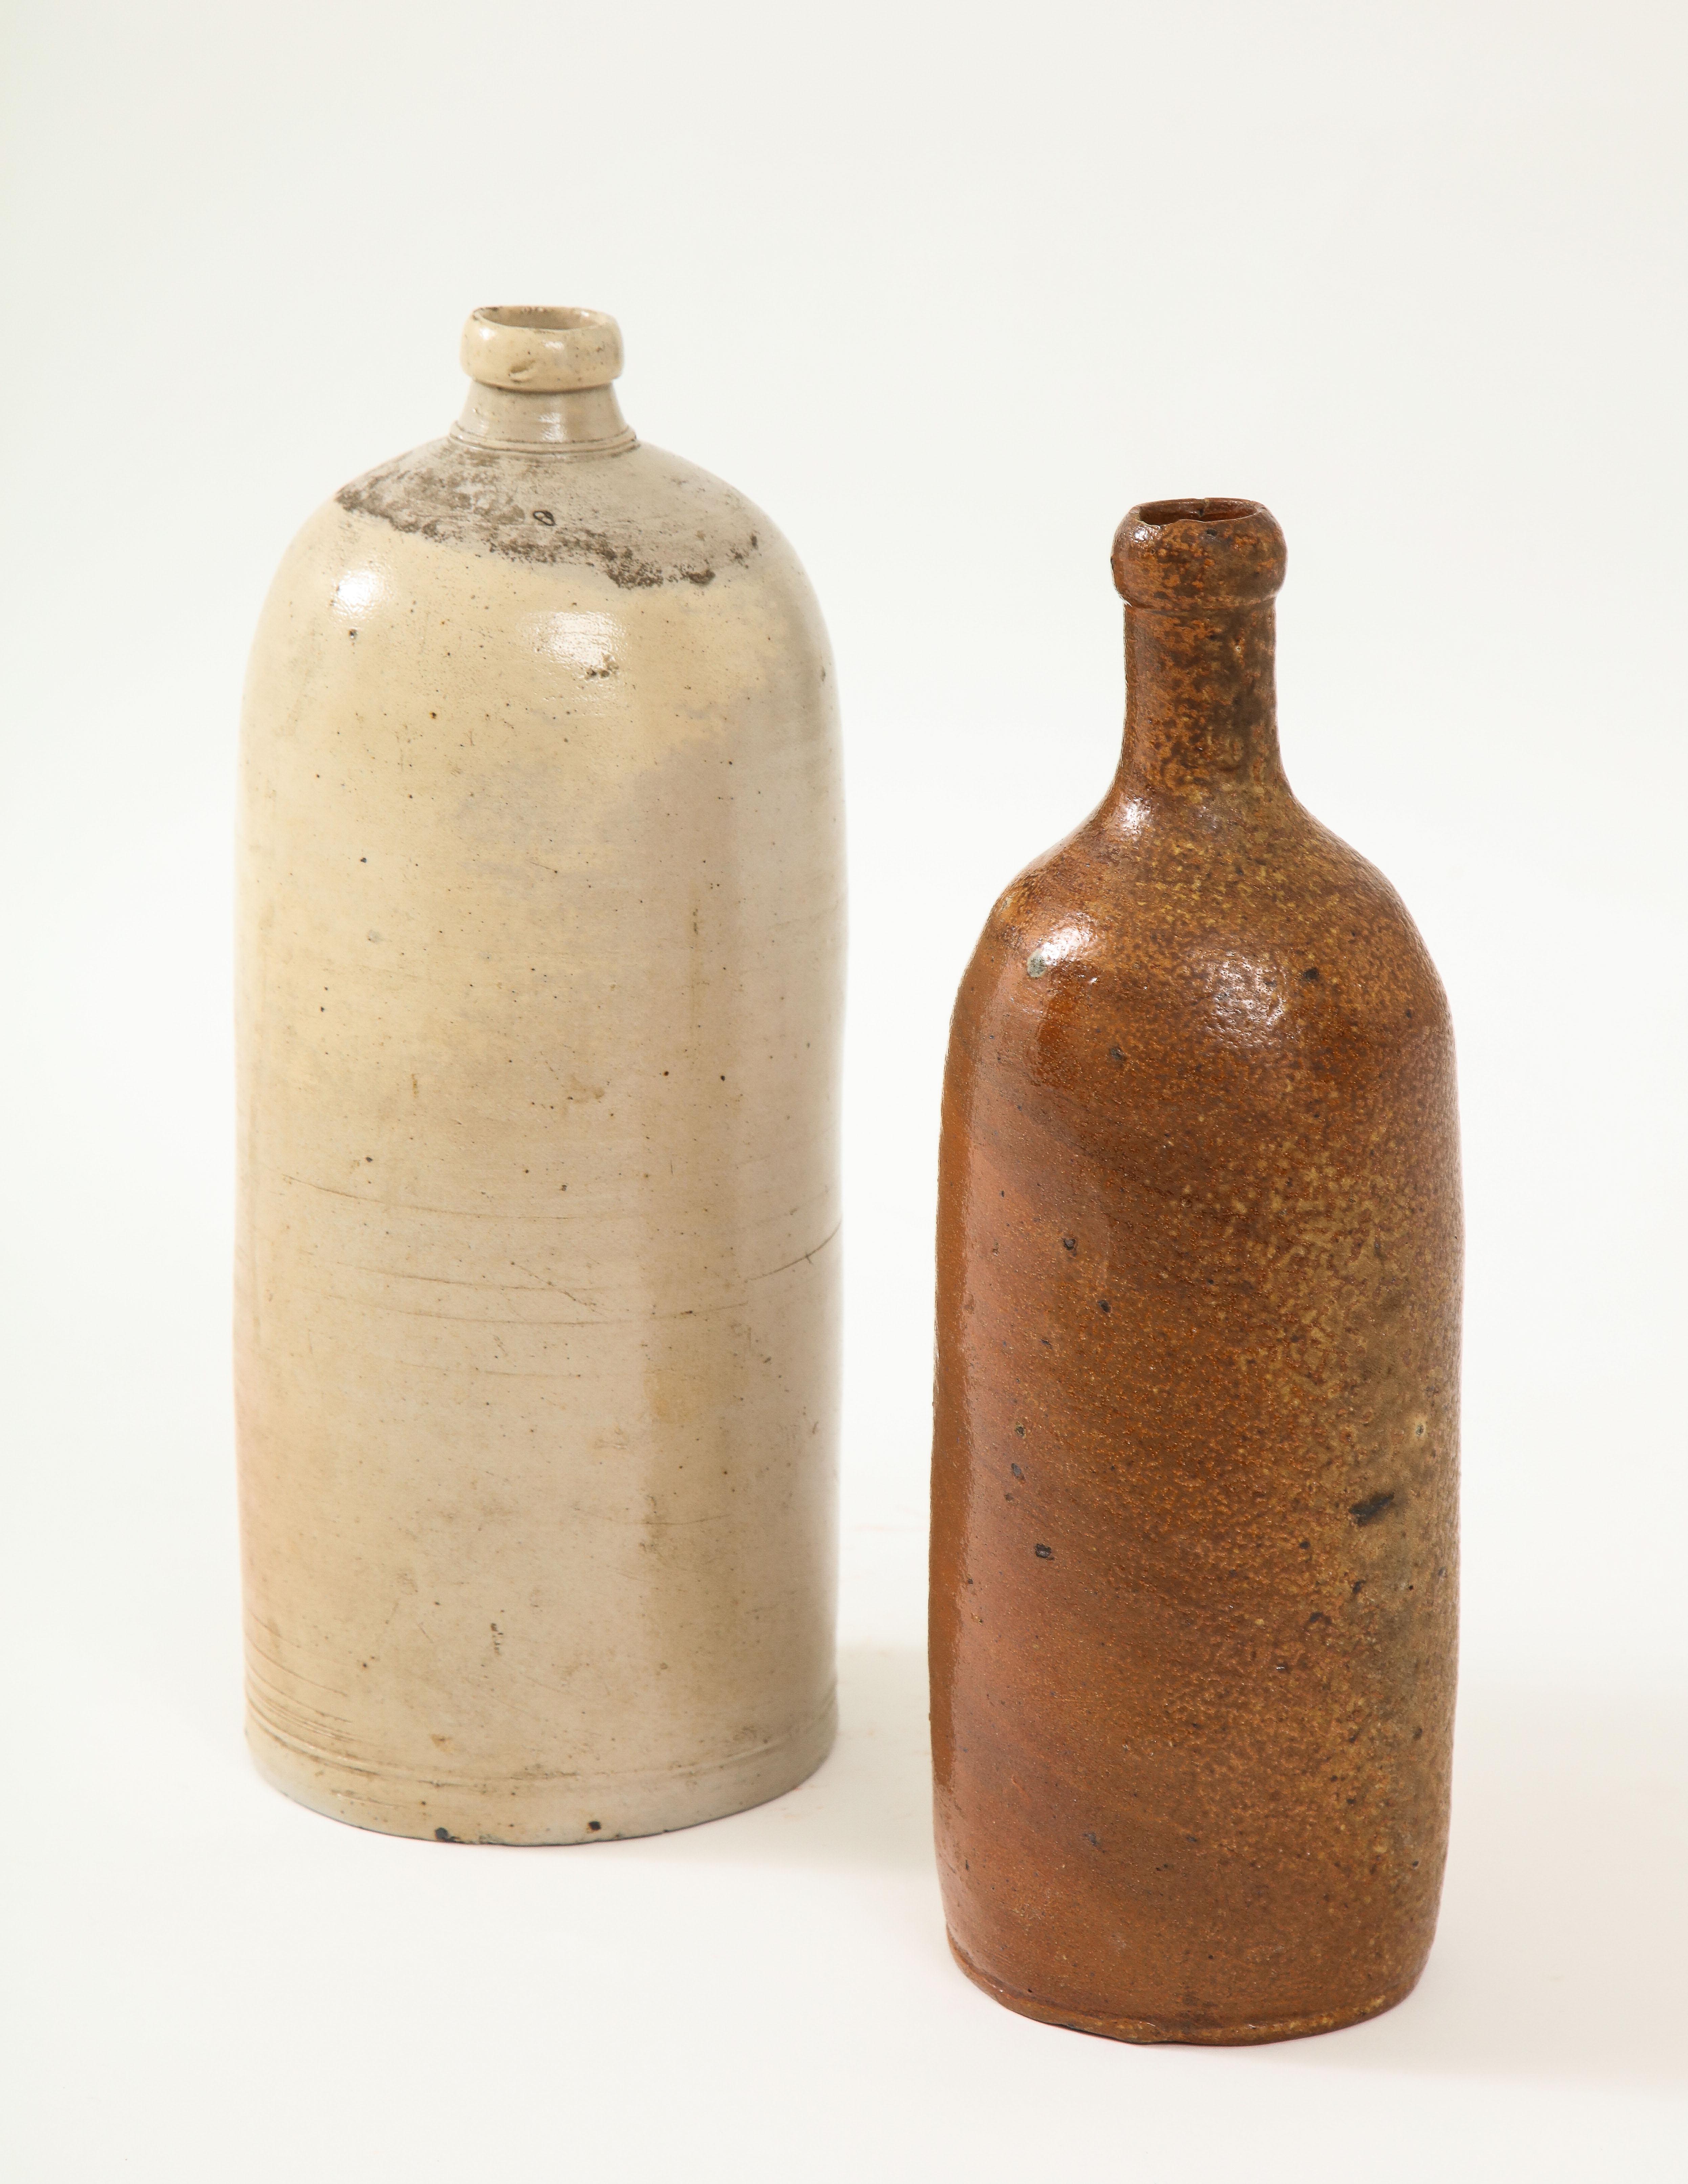 16th century and 17th century beer salt glazed stoneware jugs. One with charming small flower etched on the side along with a '2-1/2' measure note prior to firing.

Measures: Height 13, diameter 5 in.
Height 4 in.